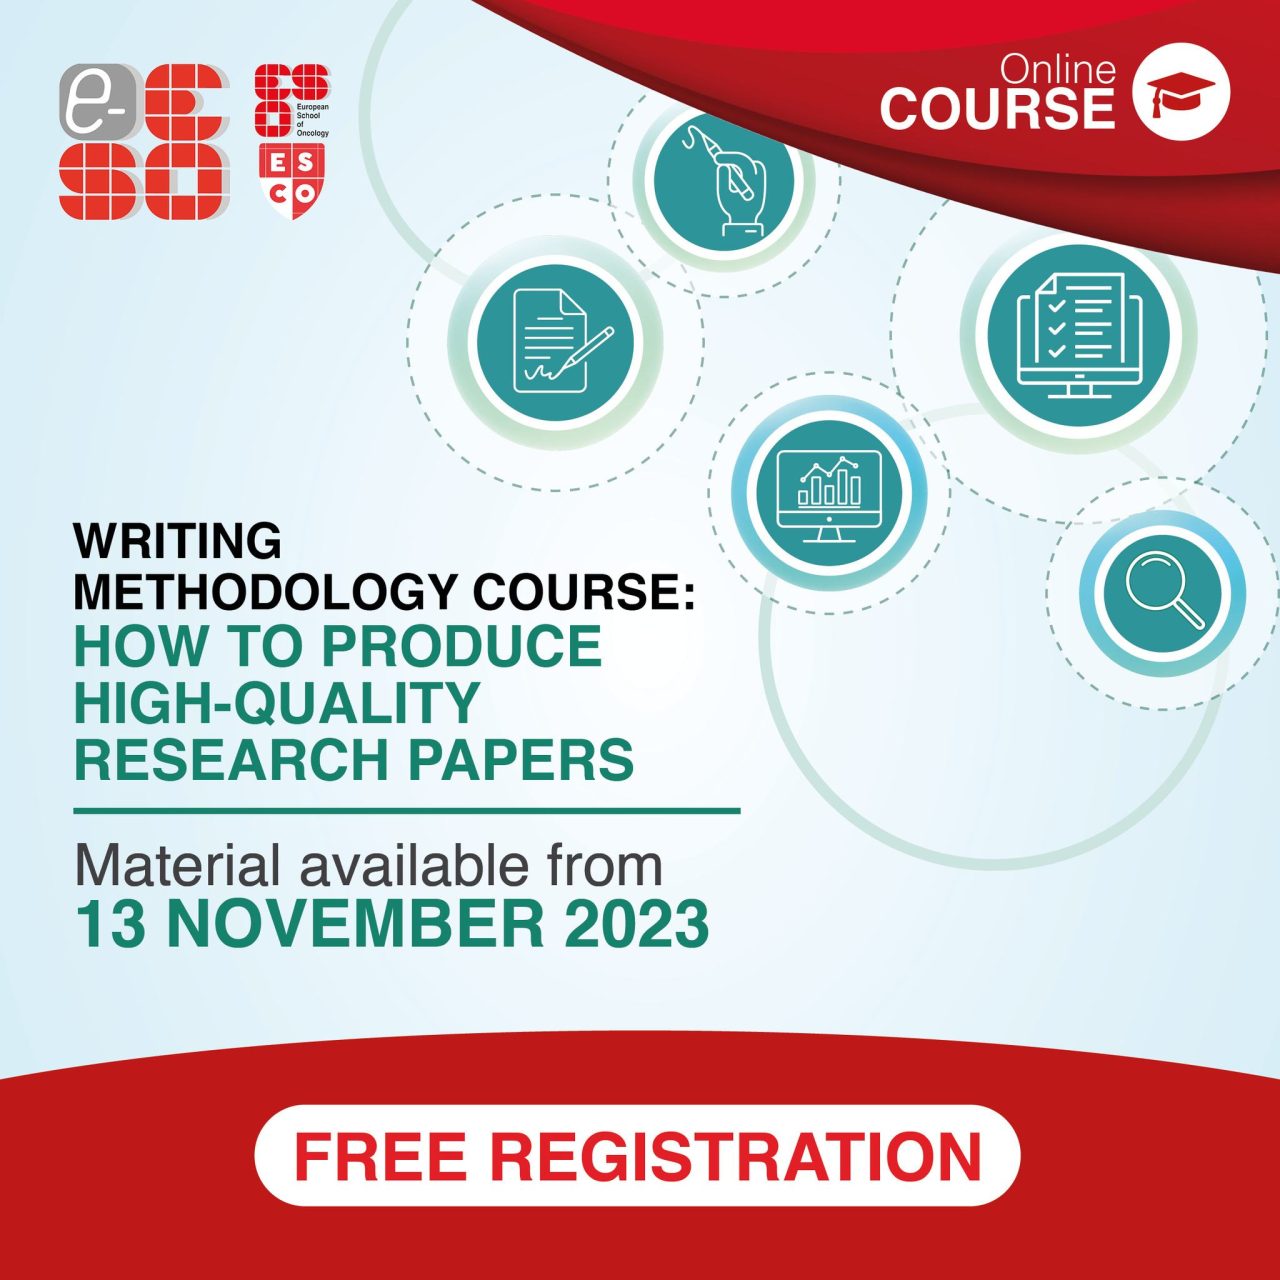 e-ESO is offering a free Online Course designed to provide a comprehensive understanding on the methodology involved in medical research writing – ESO European School of Oncology